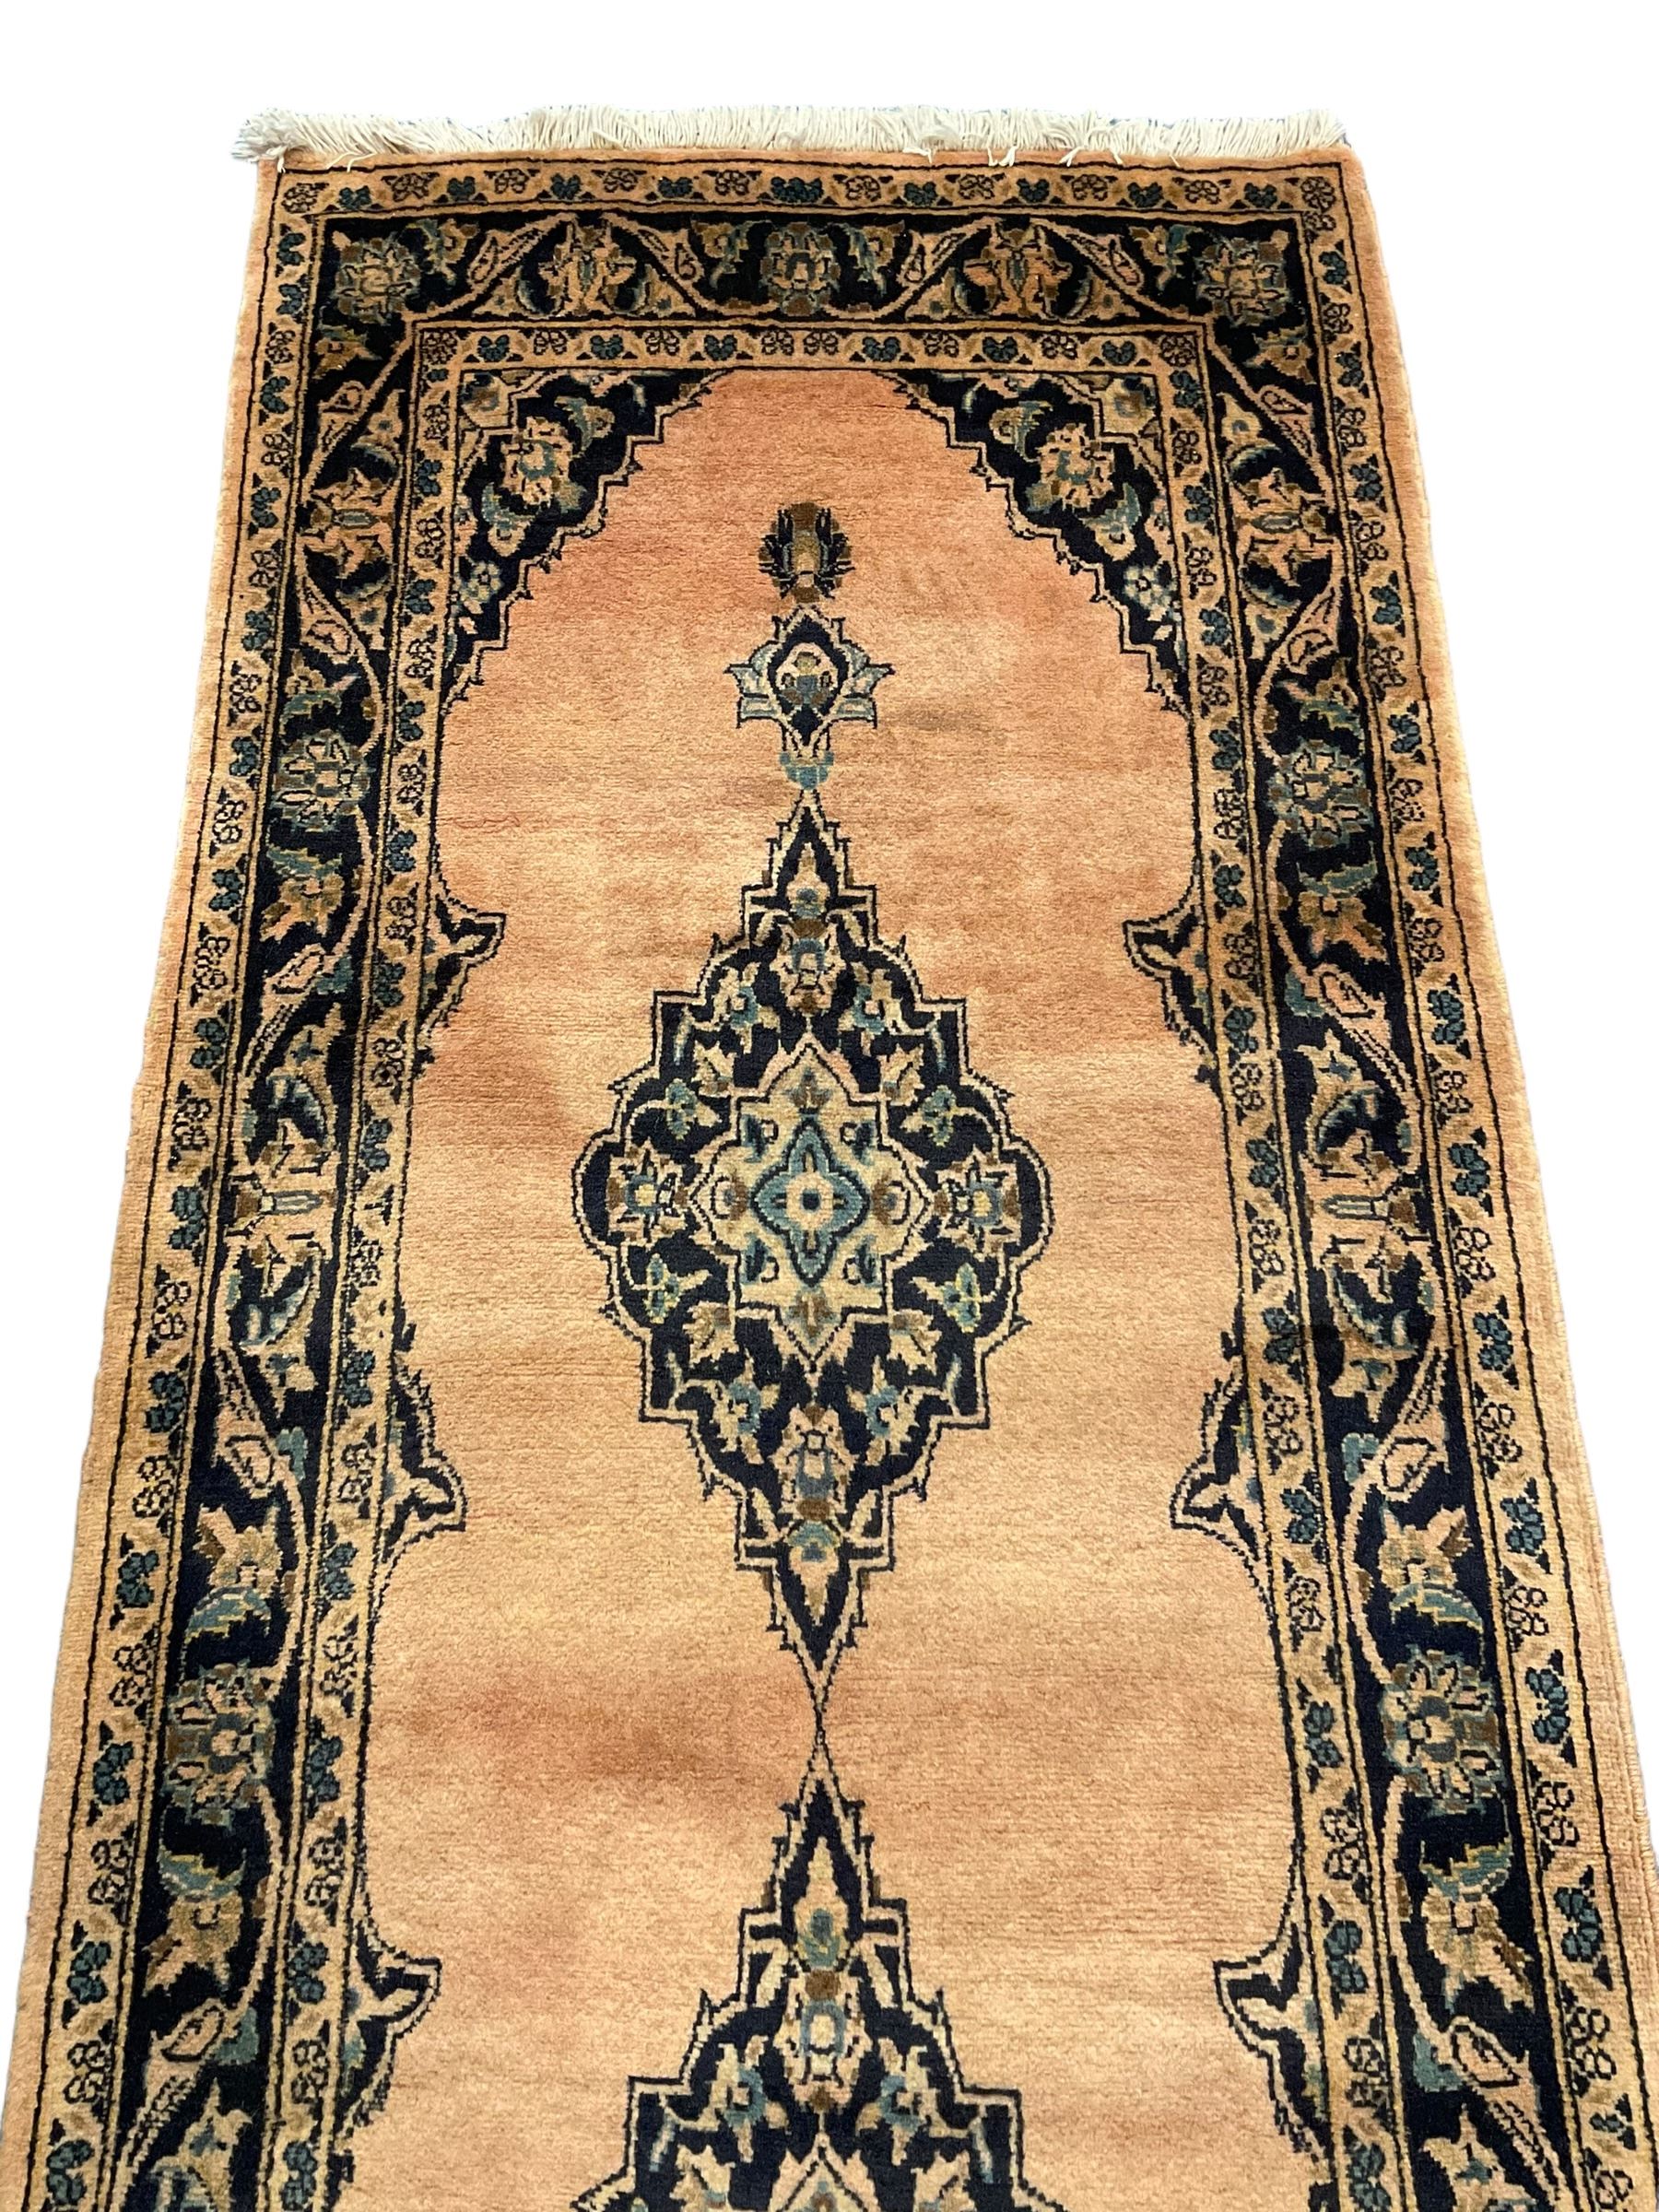 Persian pale peach ground rug - Image 2 of 6